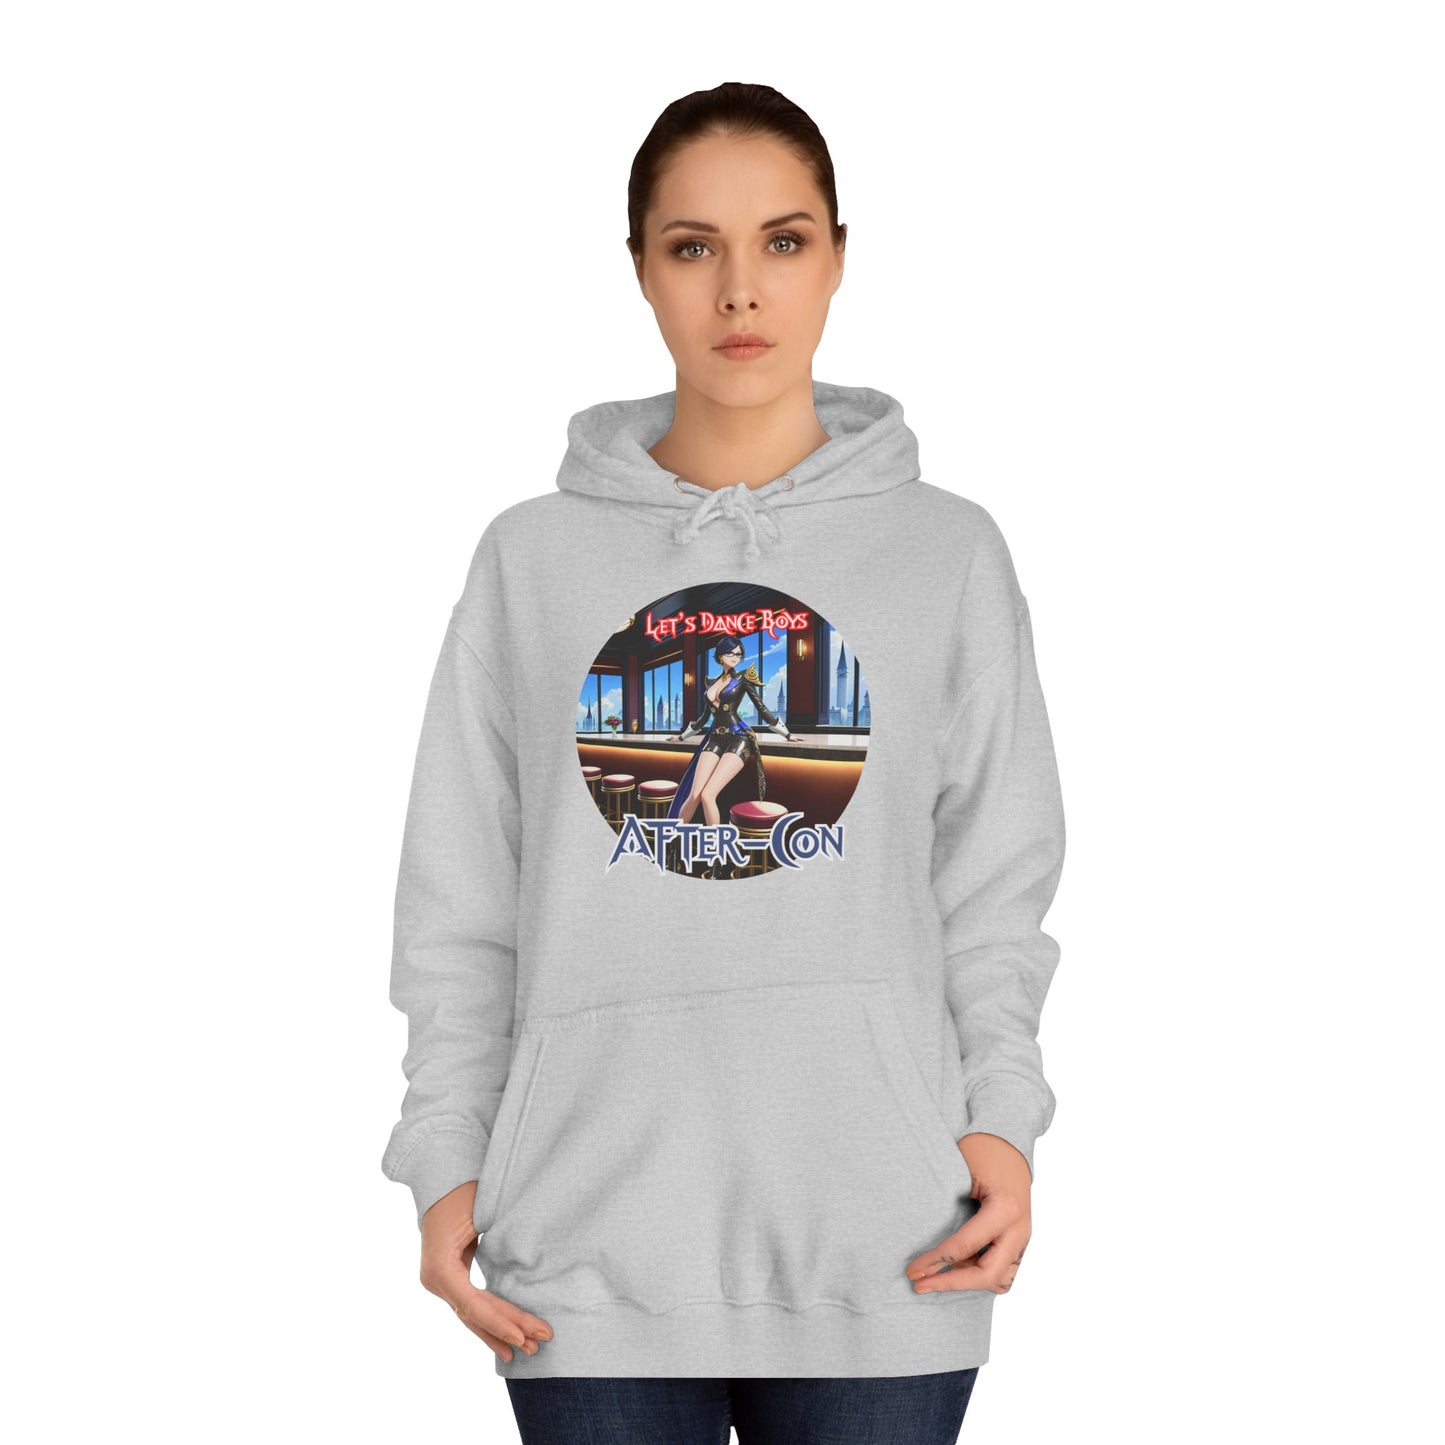 After-Con "Let's Dance Boys!" Unisex College Hoodie